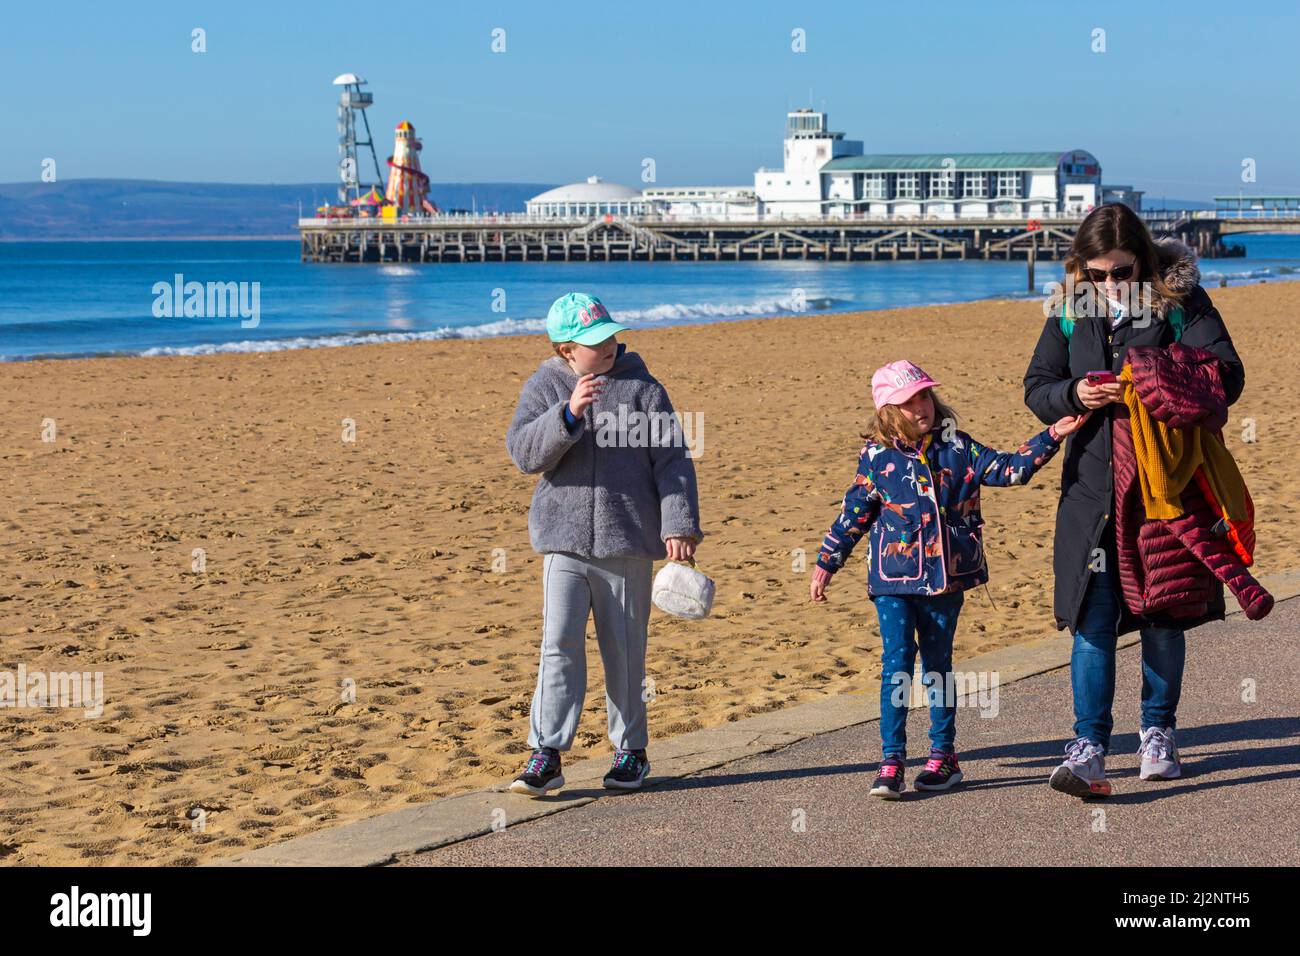 Bournemouth, Dorset UK. 3rd April 2022. UK weather: sunny with blue skies at Bournemouth beach after a cold frosty start to the day, as visitors head to the seaside to enjoy the sunshine. Credit: Carolyn Jenkins/Alamy Live News Stock Photo